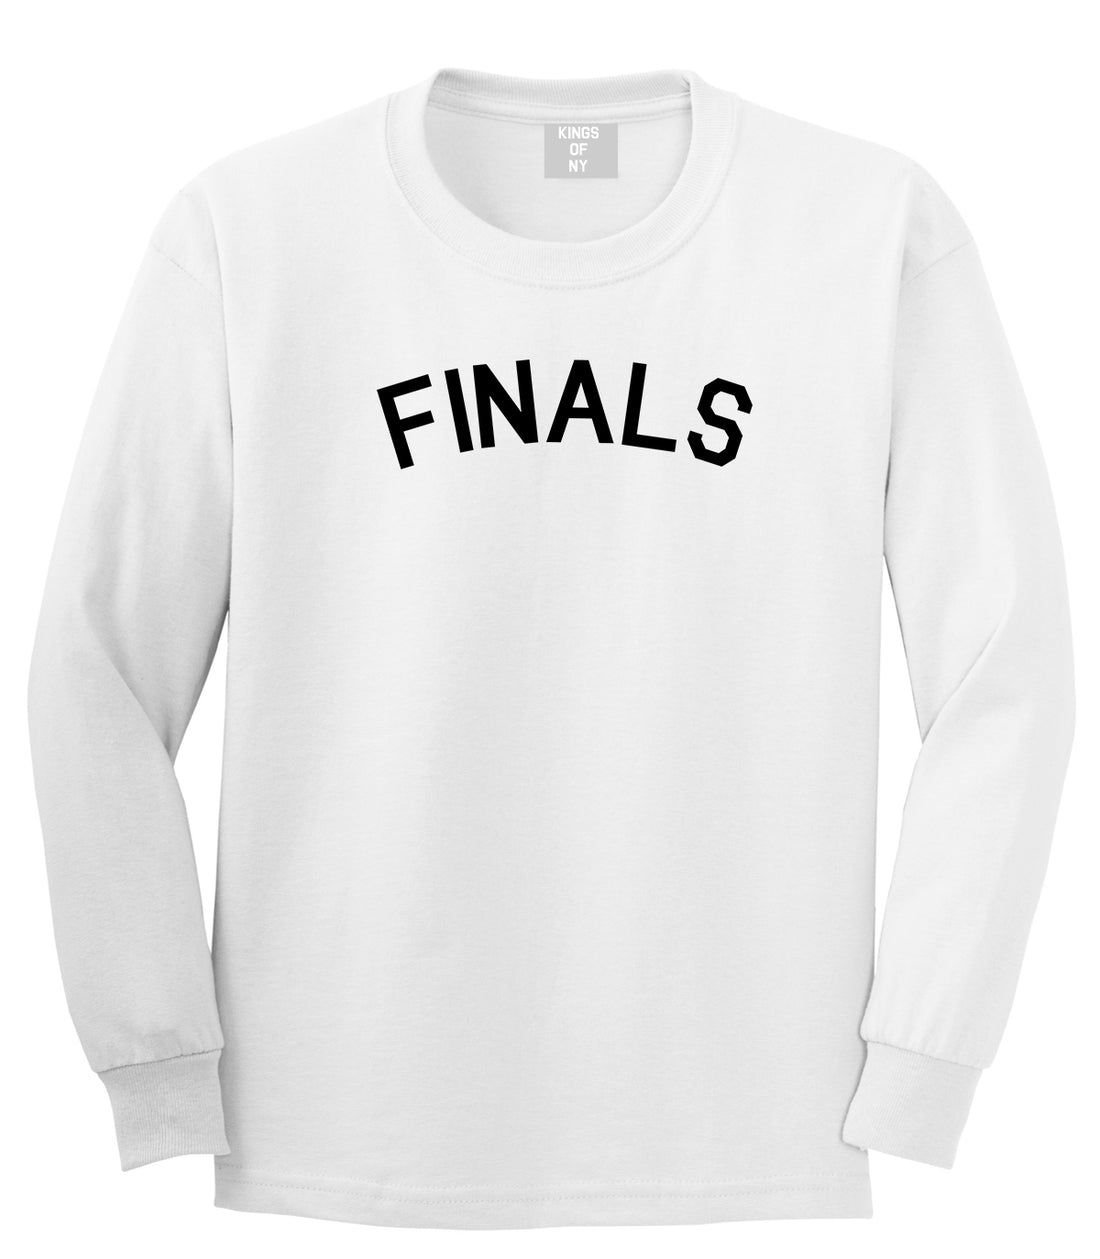 Finals Sports Mens White Long Sleeve T-Shirt by KINGS OF NY